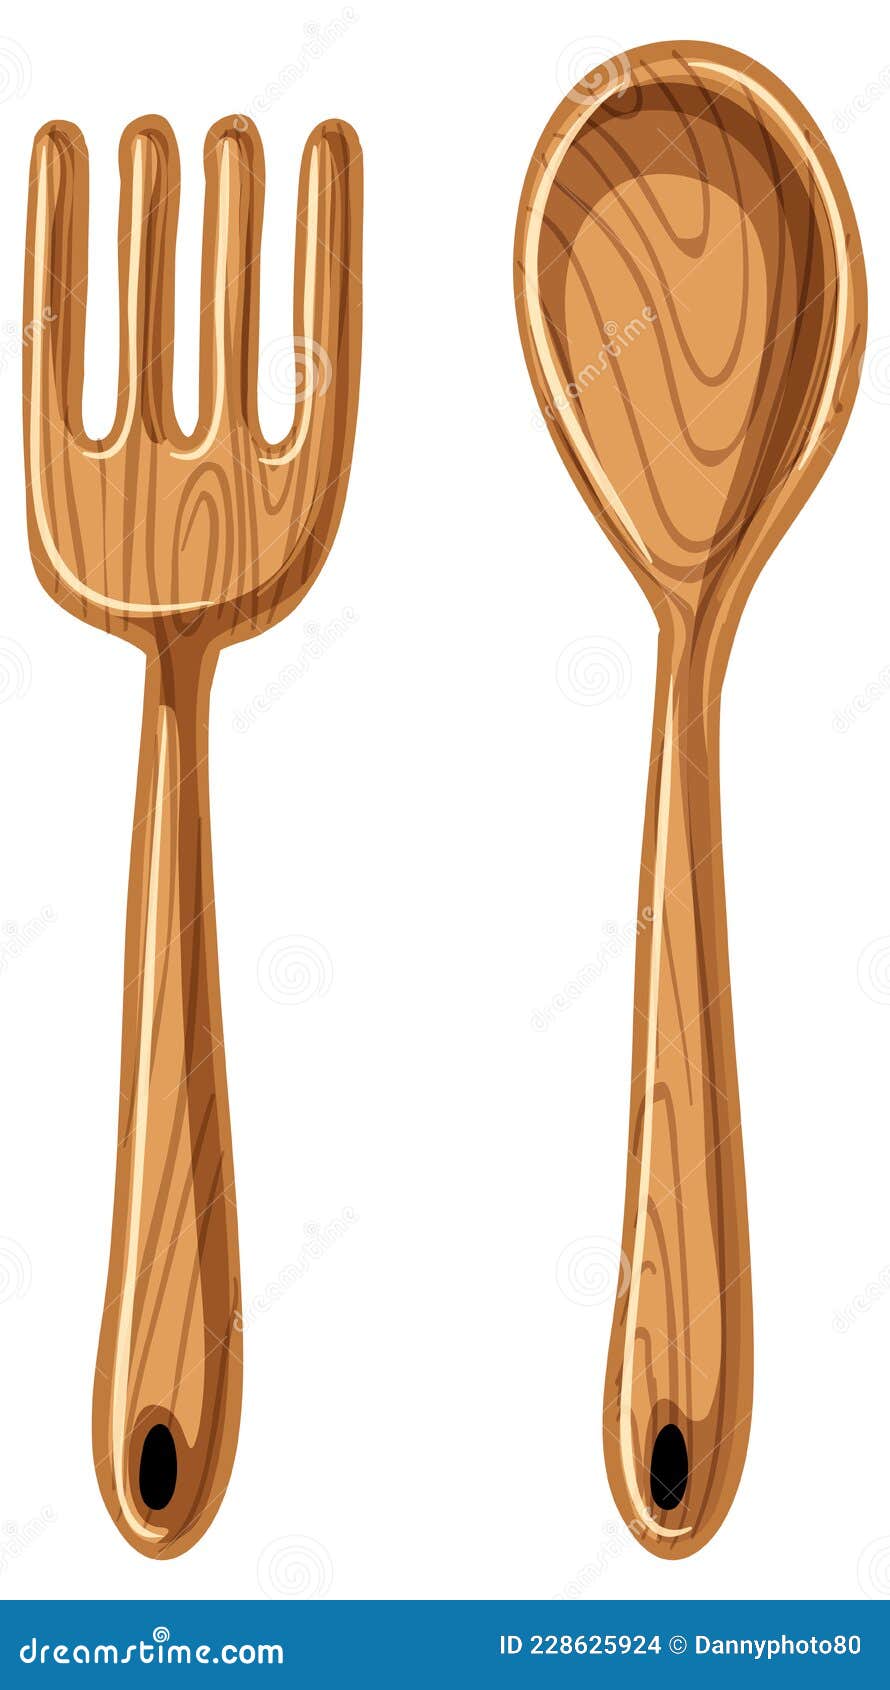 Wooden spoon icons - 32 Free Wooden spoon icons | Download PNG & SVG